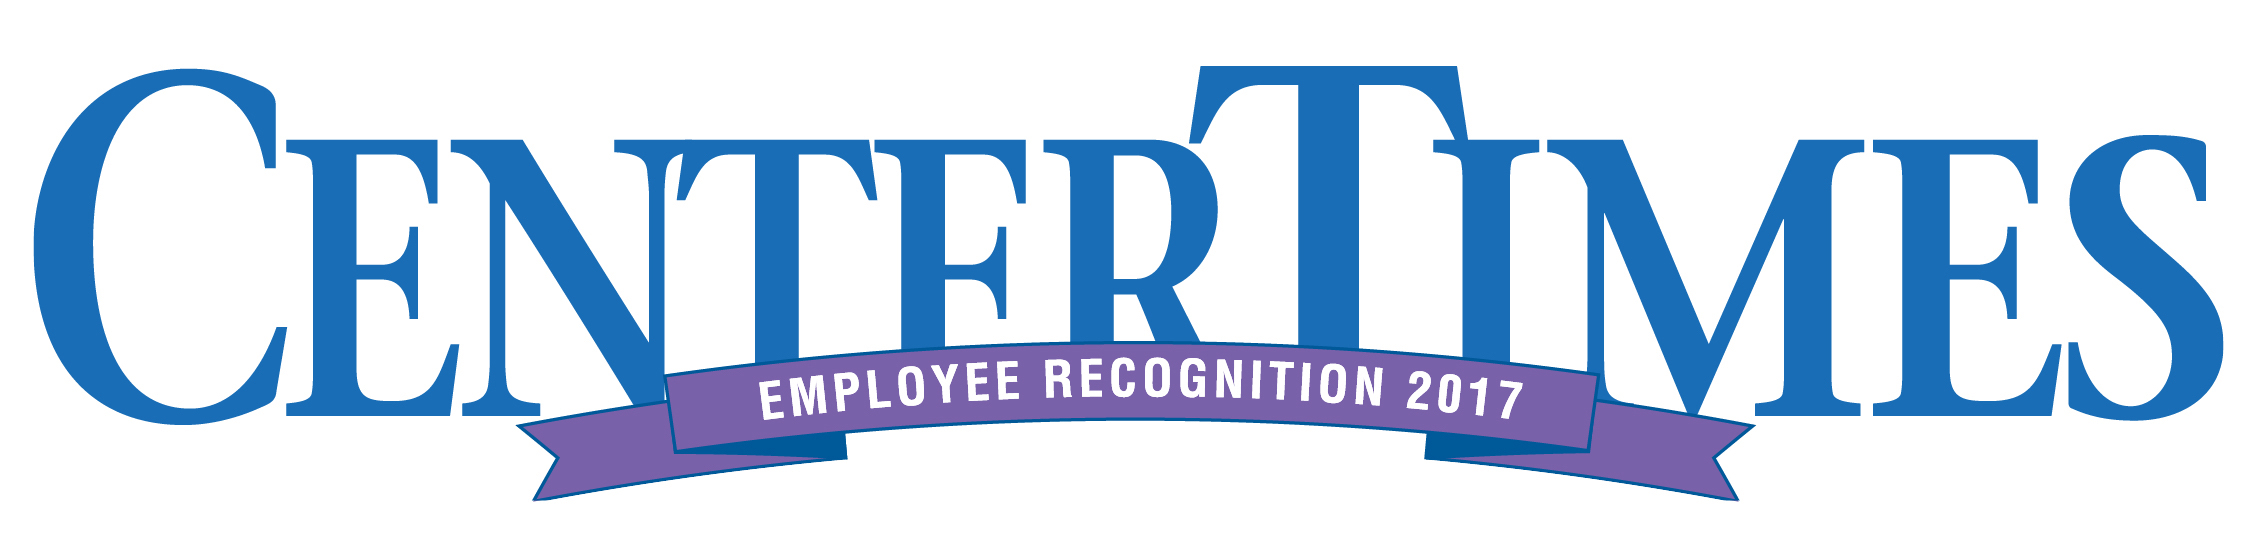 Center Times Employee Recognition 2017